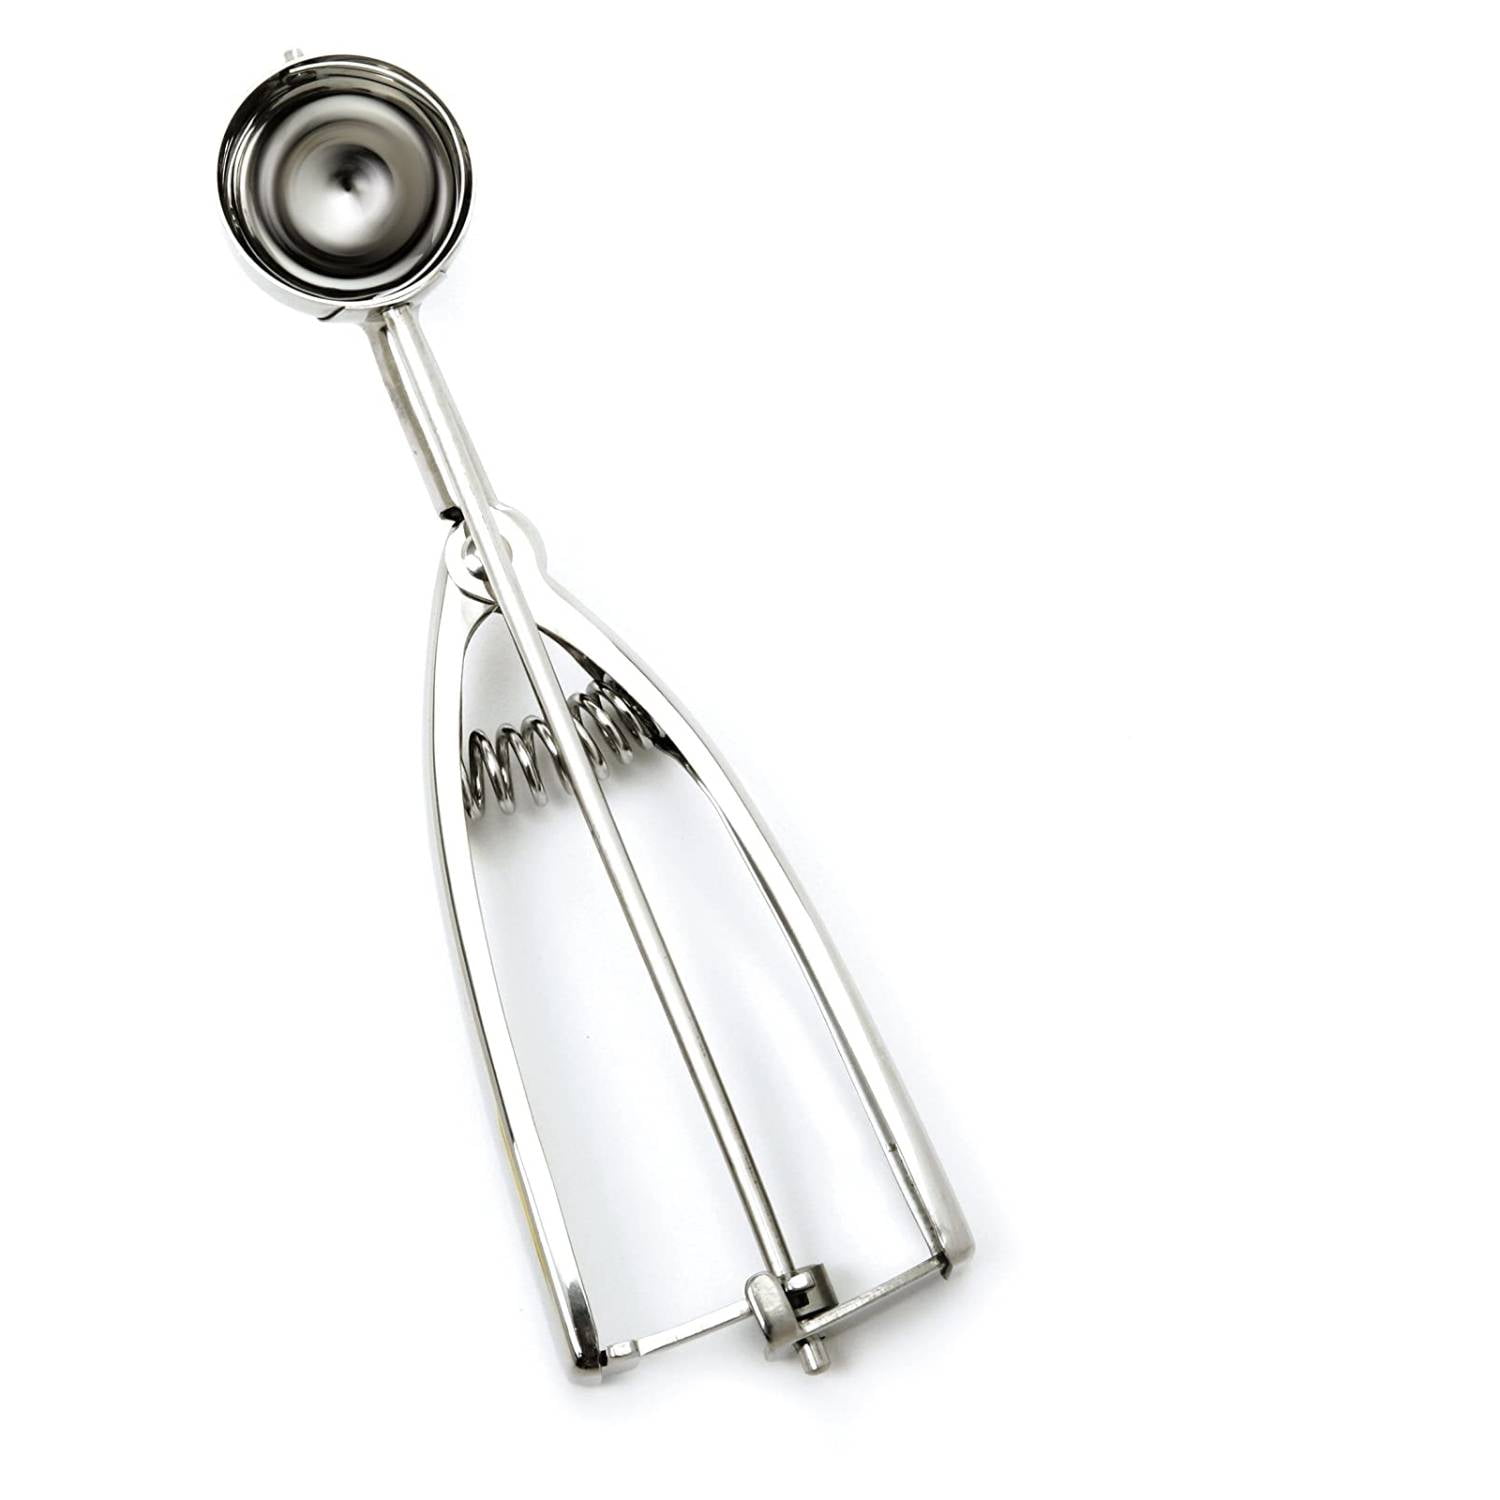 Solula Professional 18/8 Stainless Steel Small Cookie Scoop